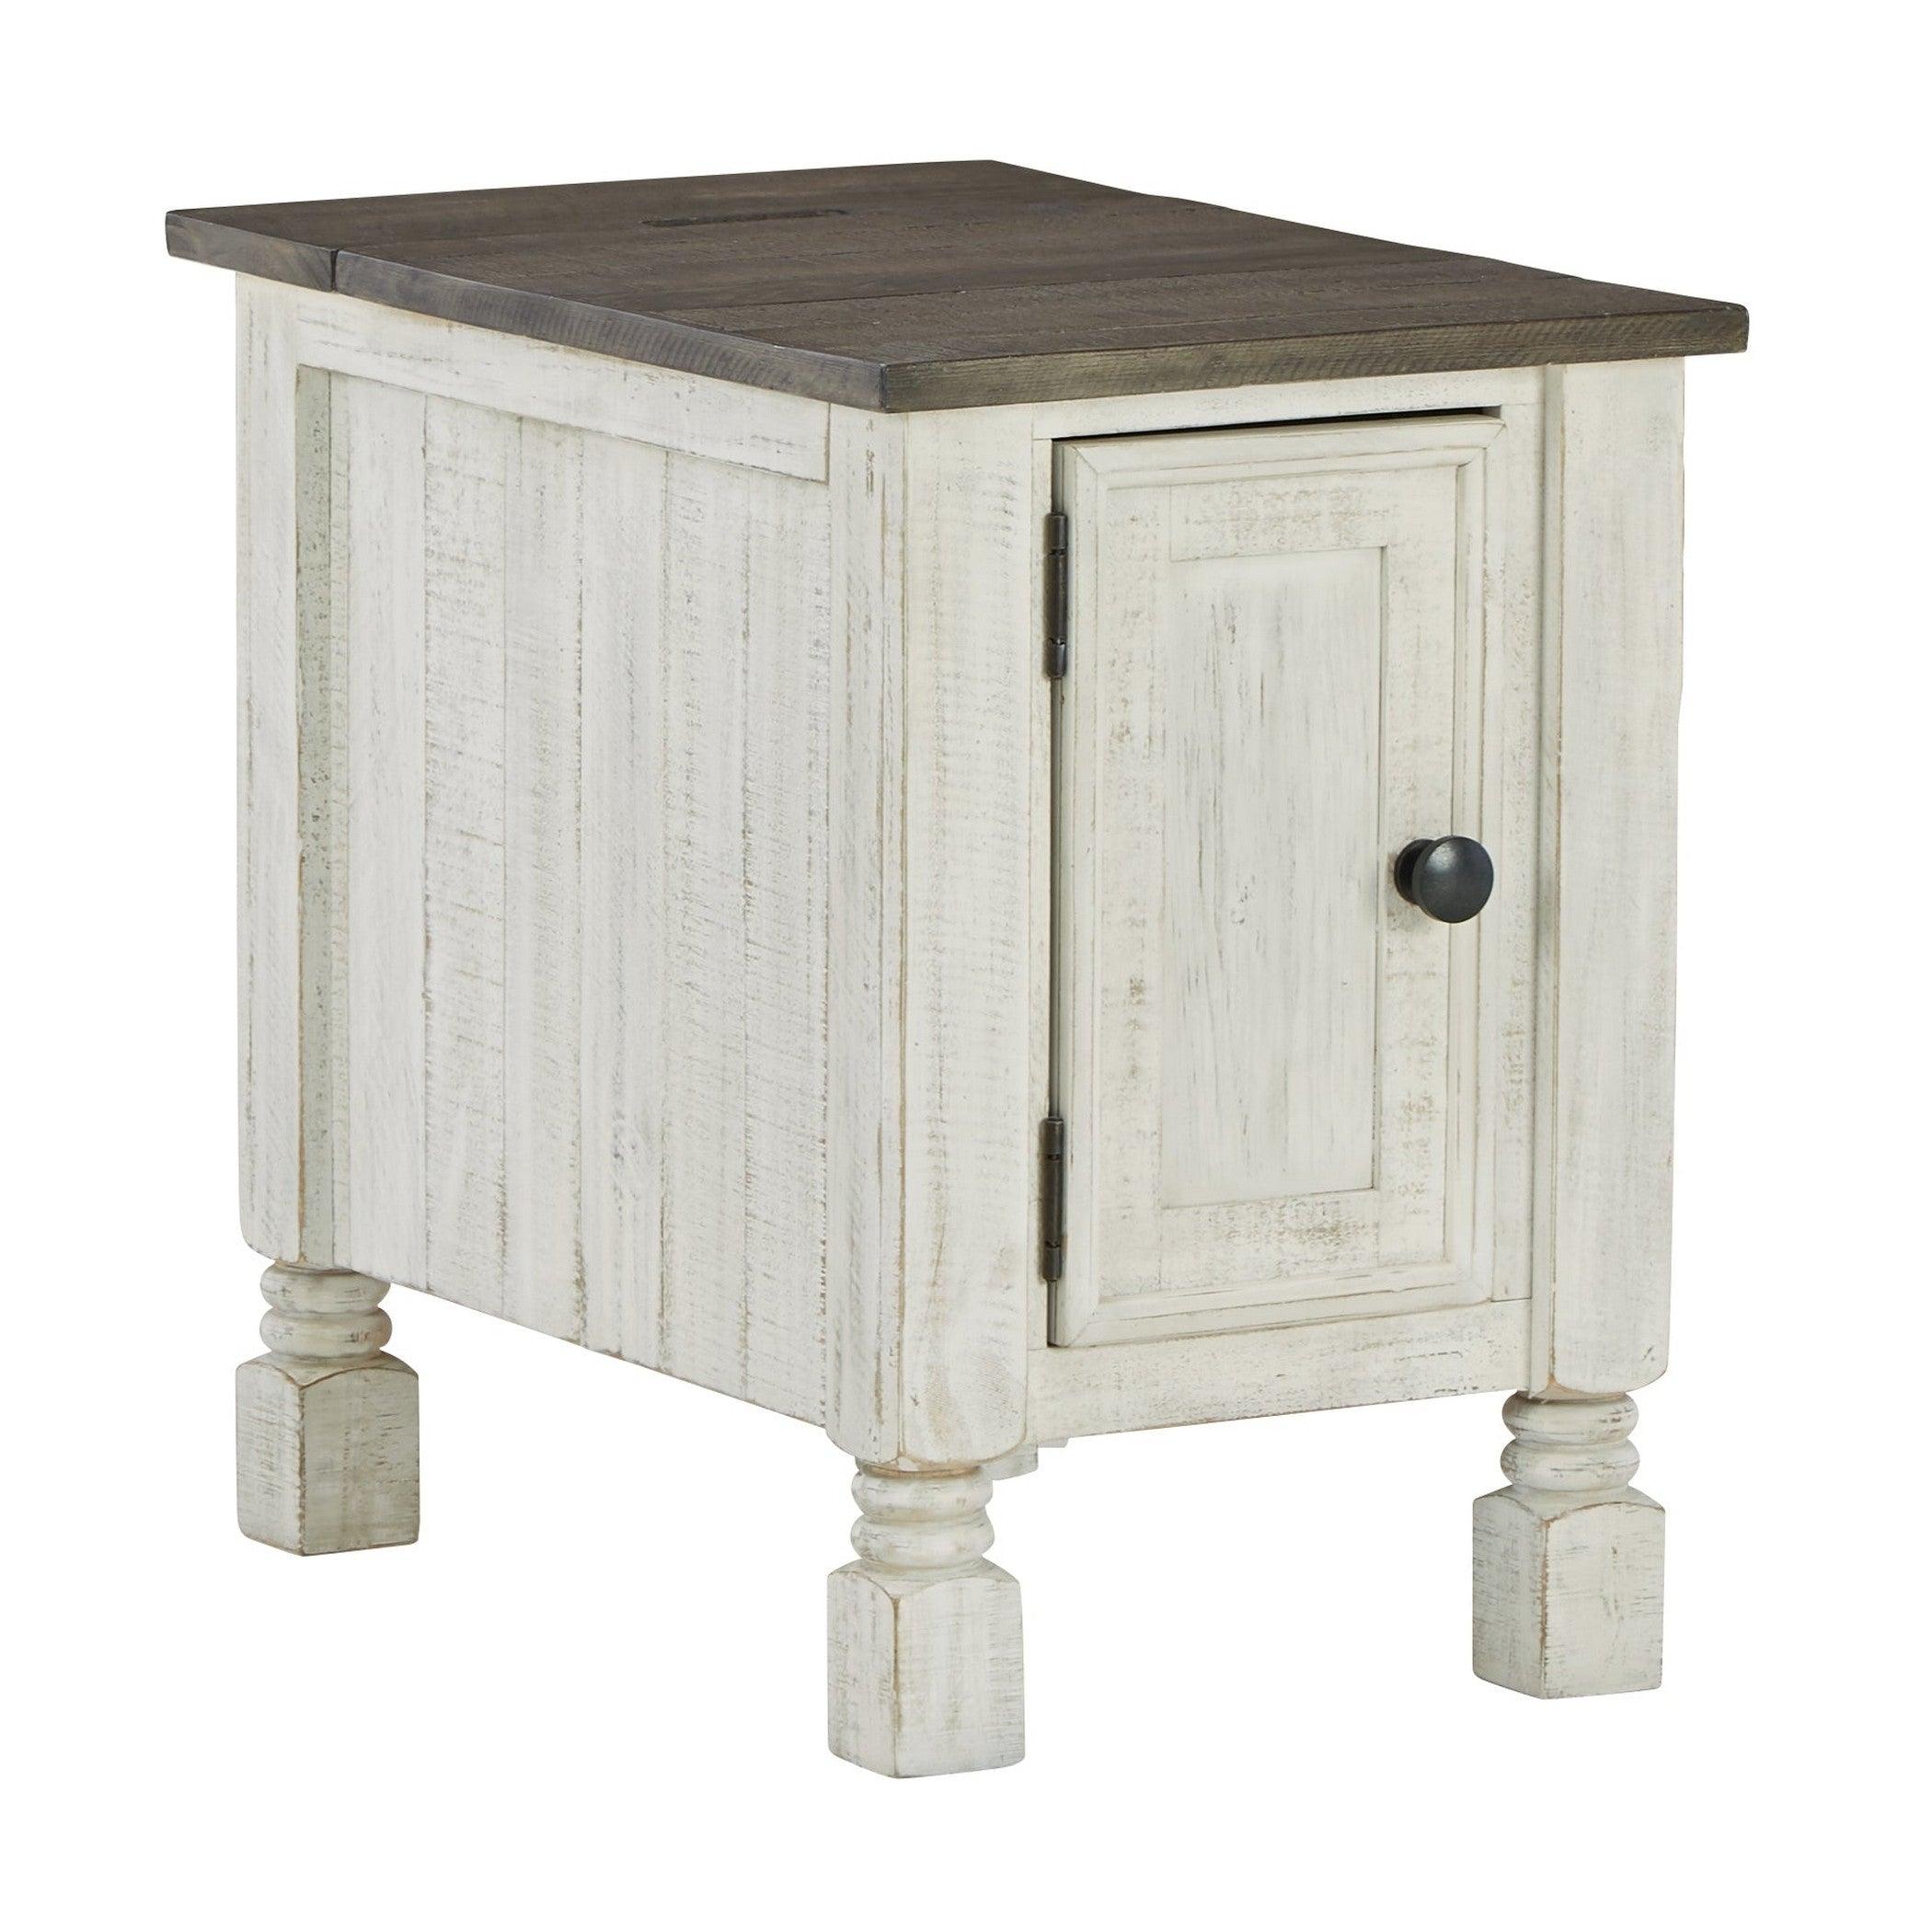 Havalance Chairside End Table Ash-T994-7